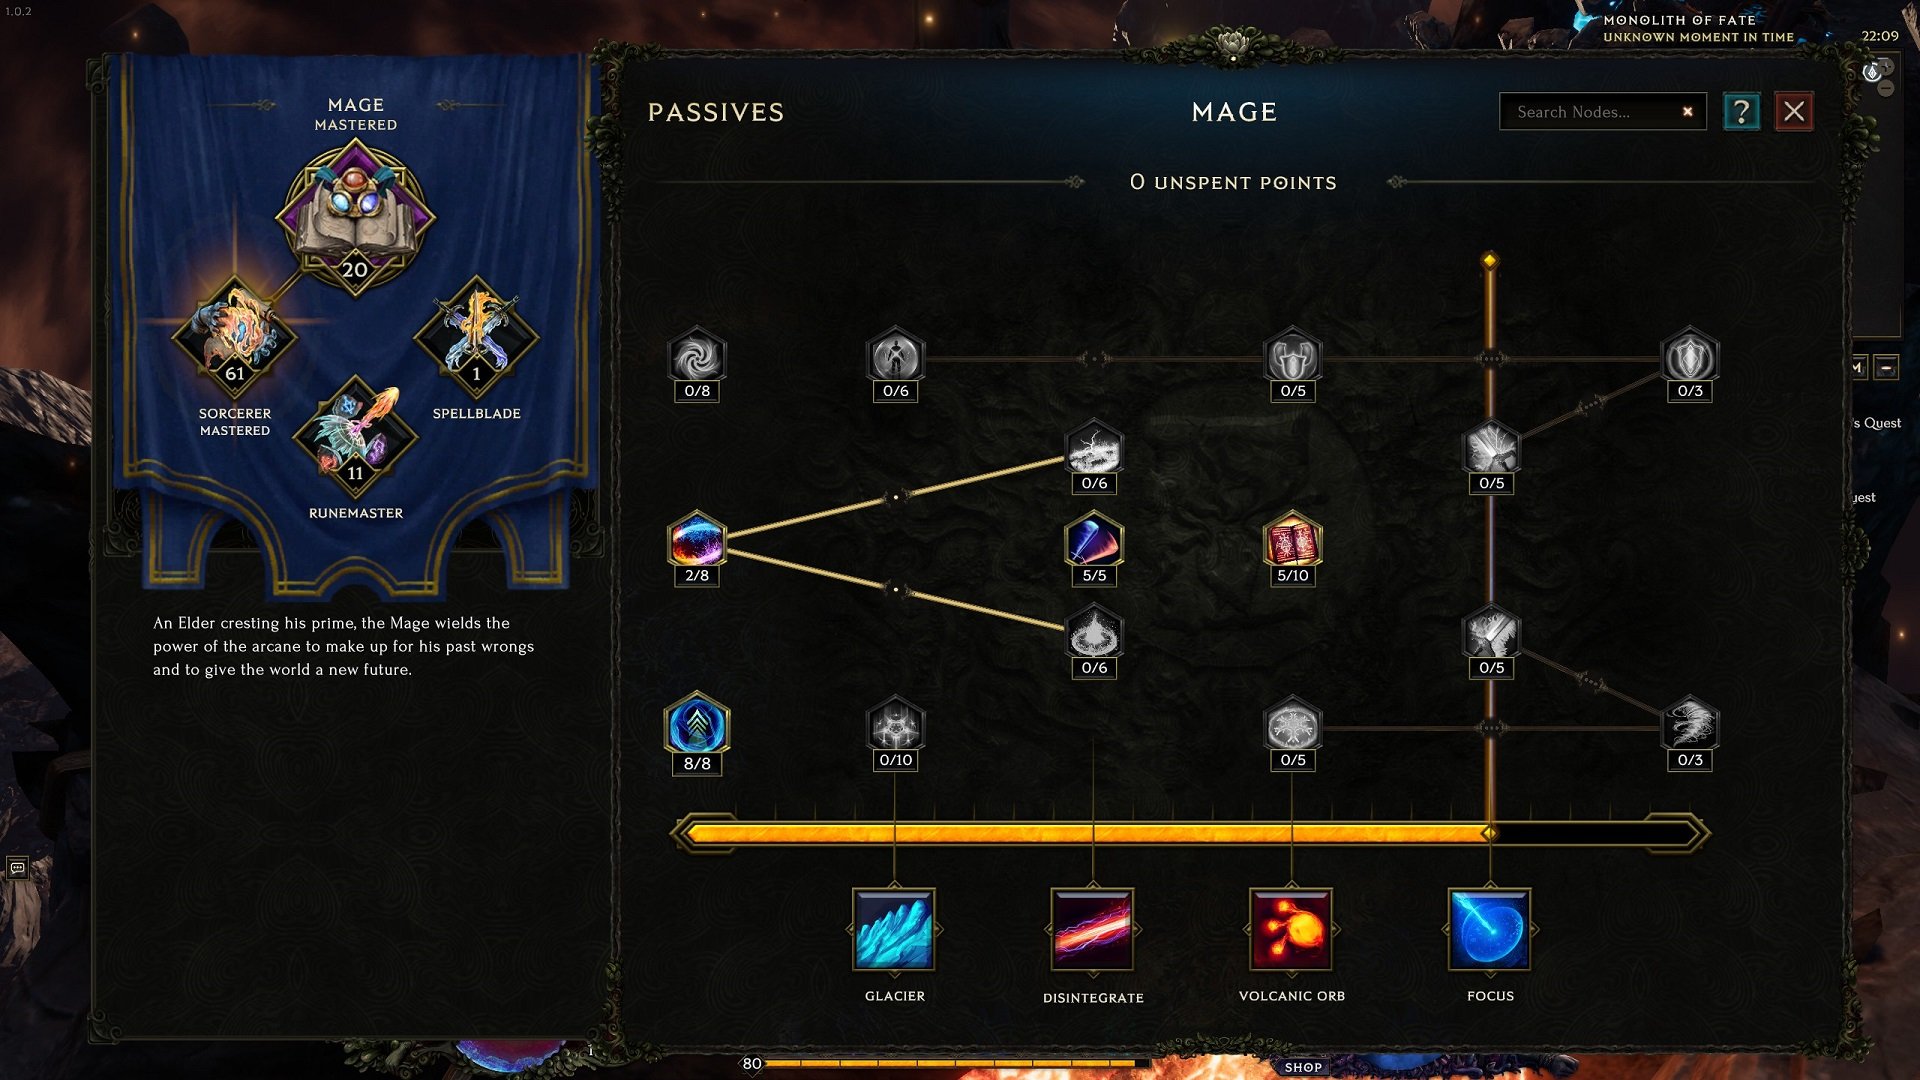 An image of the Mage's passives in Last Epoch.